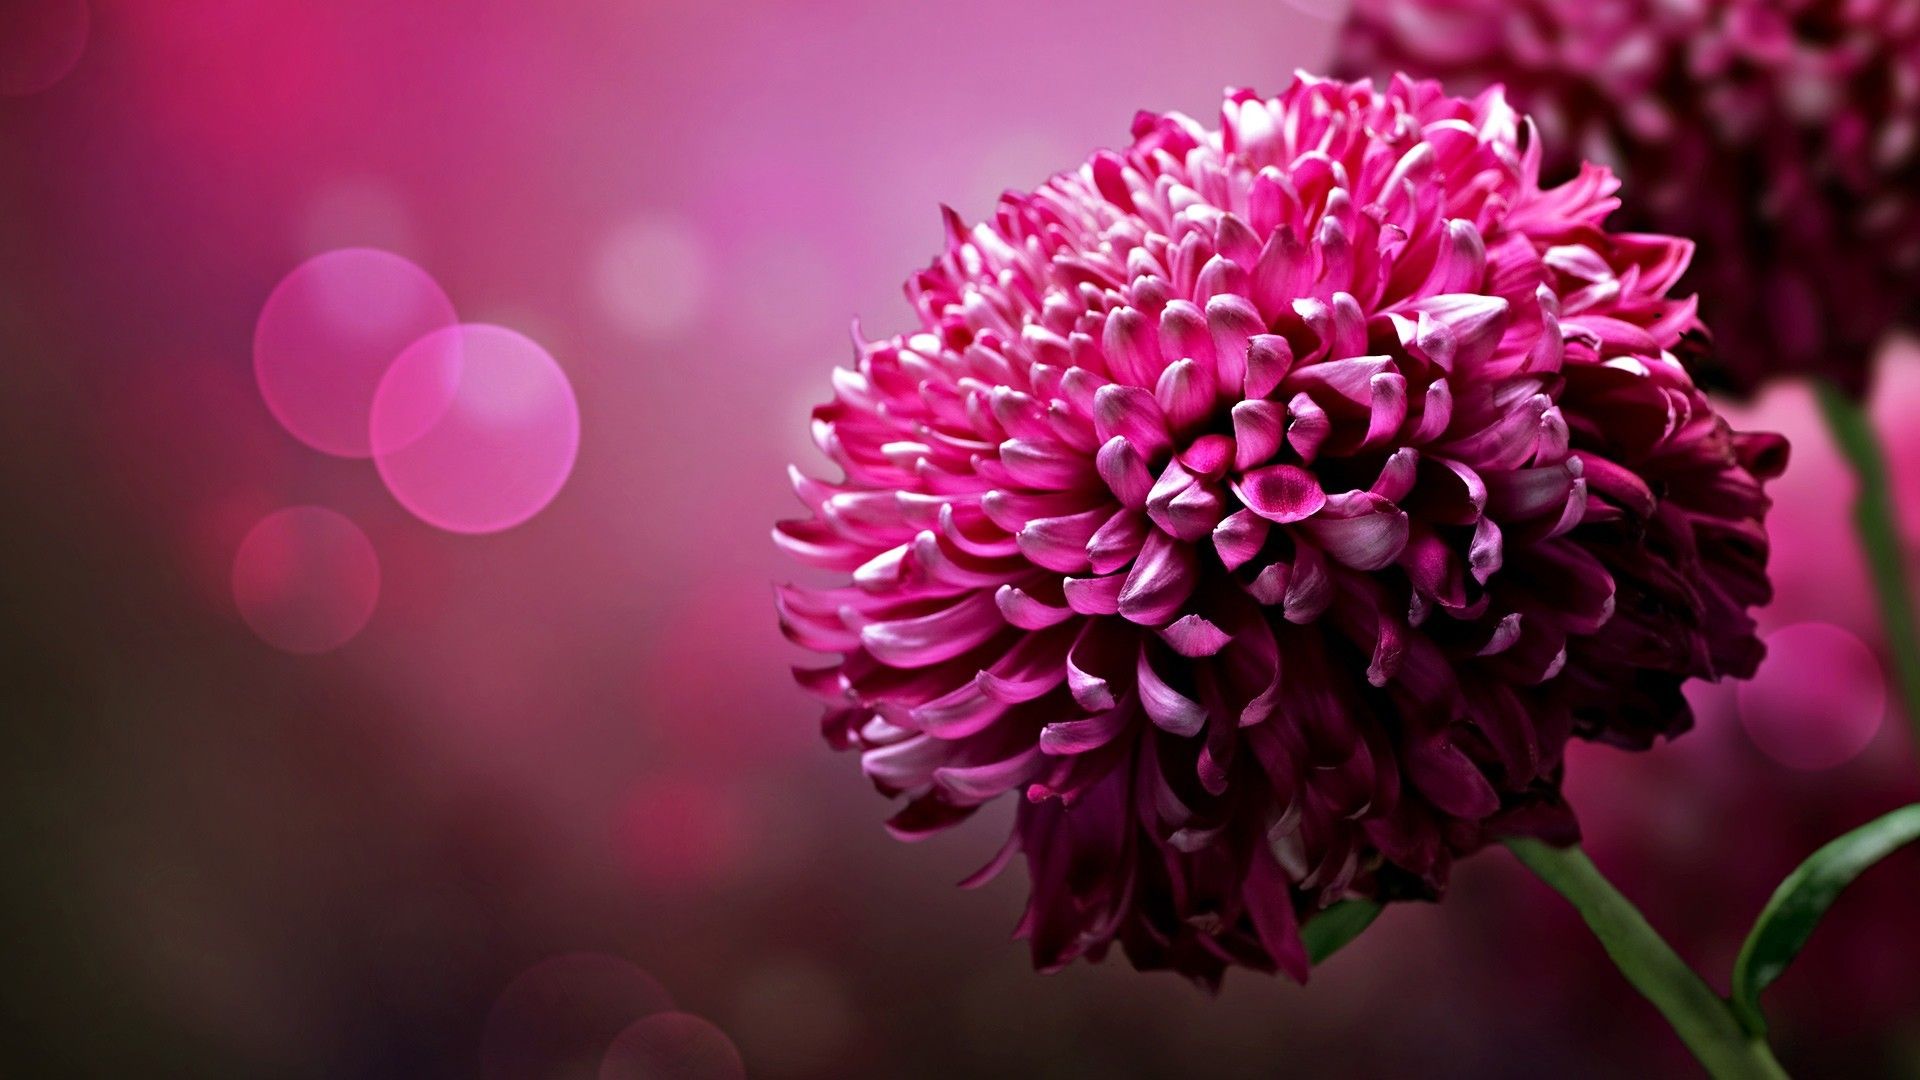 HD Flowers Wallpapers For Samsung Laptop 1